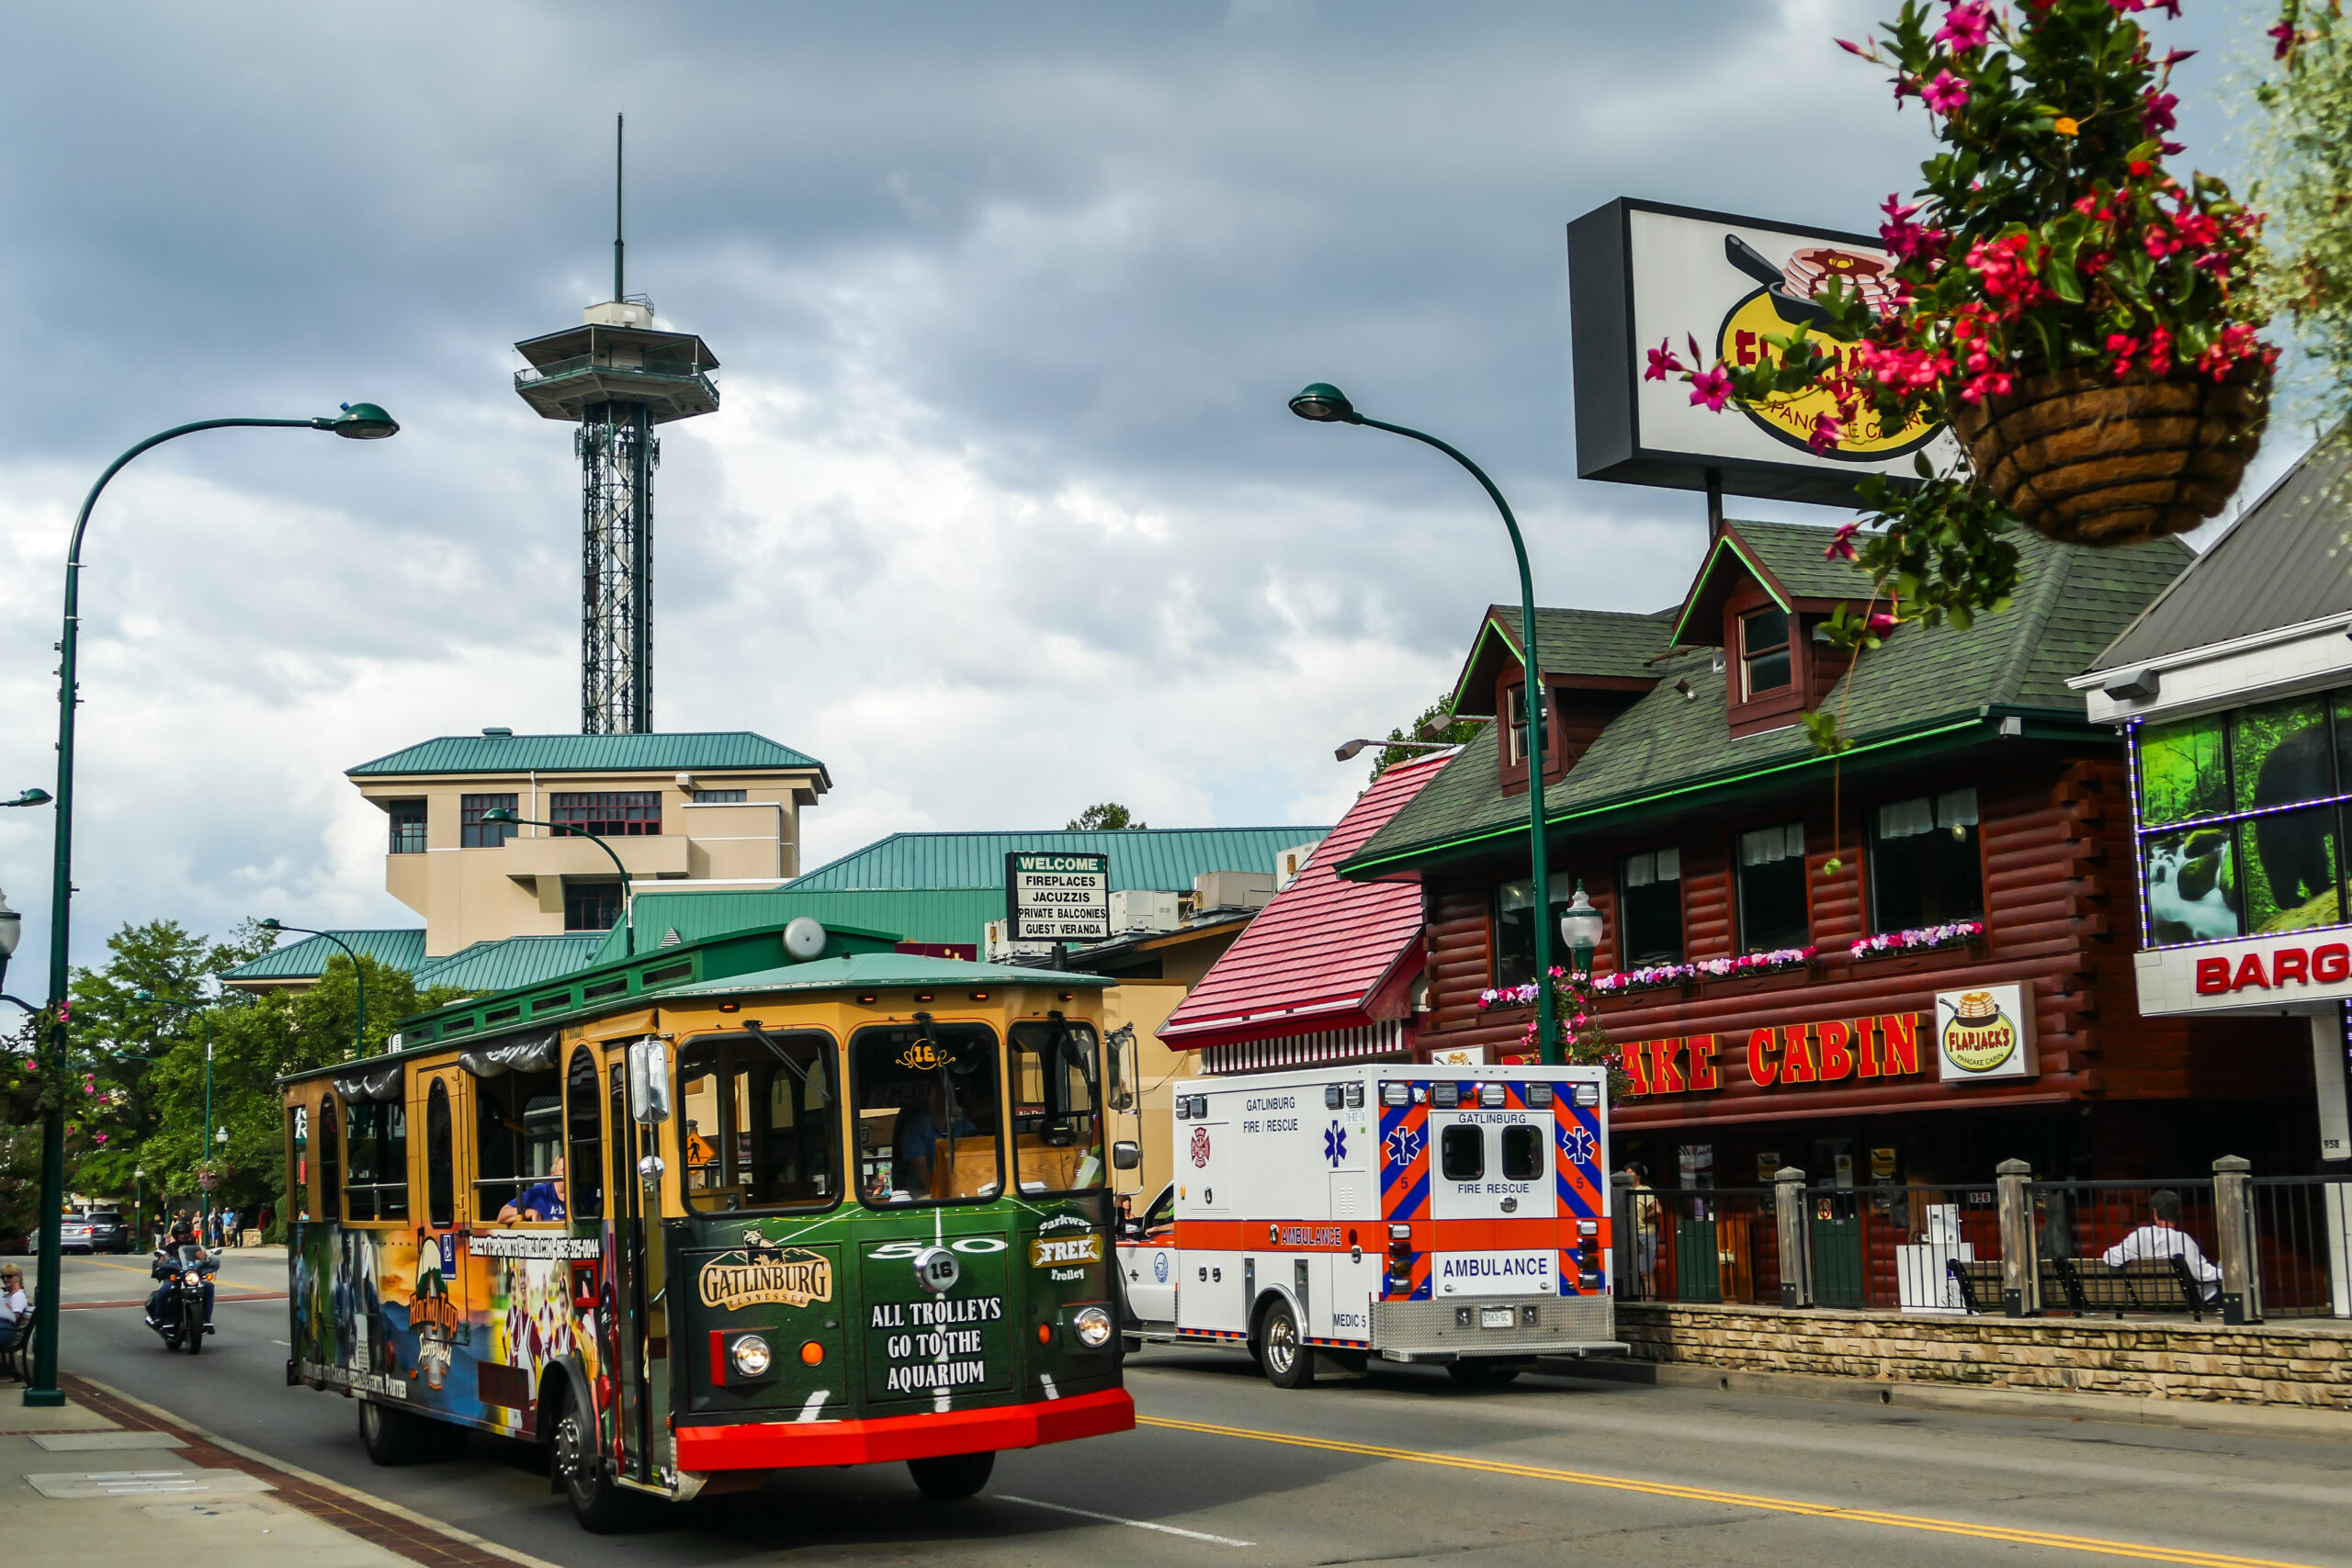 Photo of the Gatlinburg Trolley with the Gatlinburg Space Needle seen in the background. One of the fun free things to do in Gatlinburg.